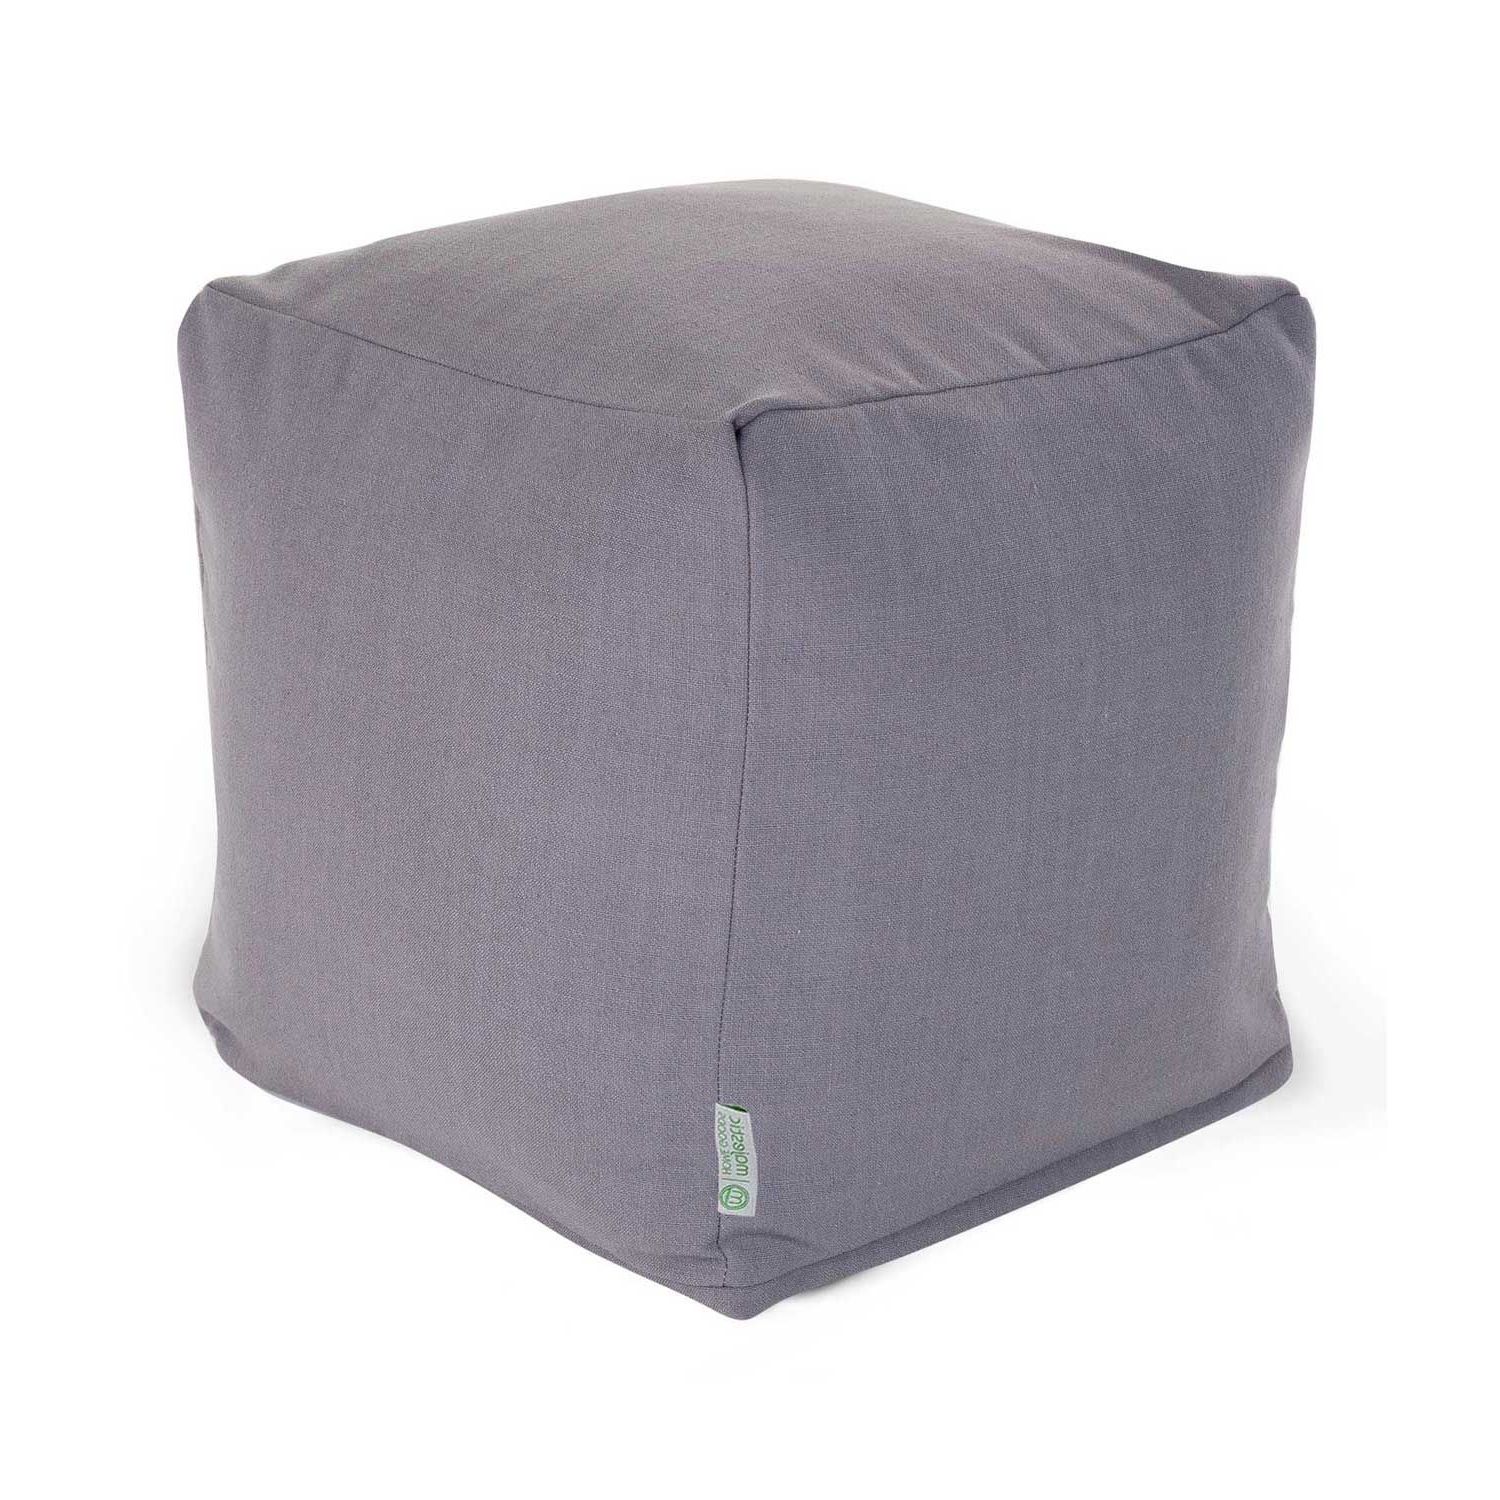 Cube Ottoman, Ottoman, Home Goods Regarding Widely Used Beige Solid Cuboid Pouf Ottomans (View 1 of 10)